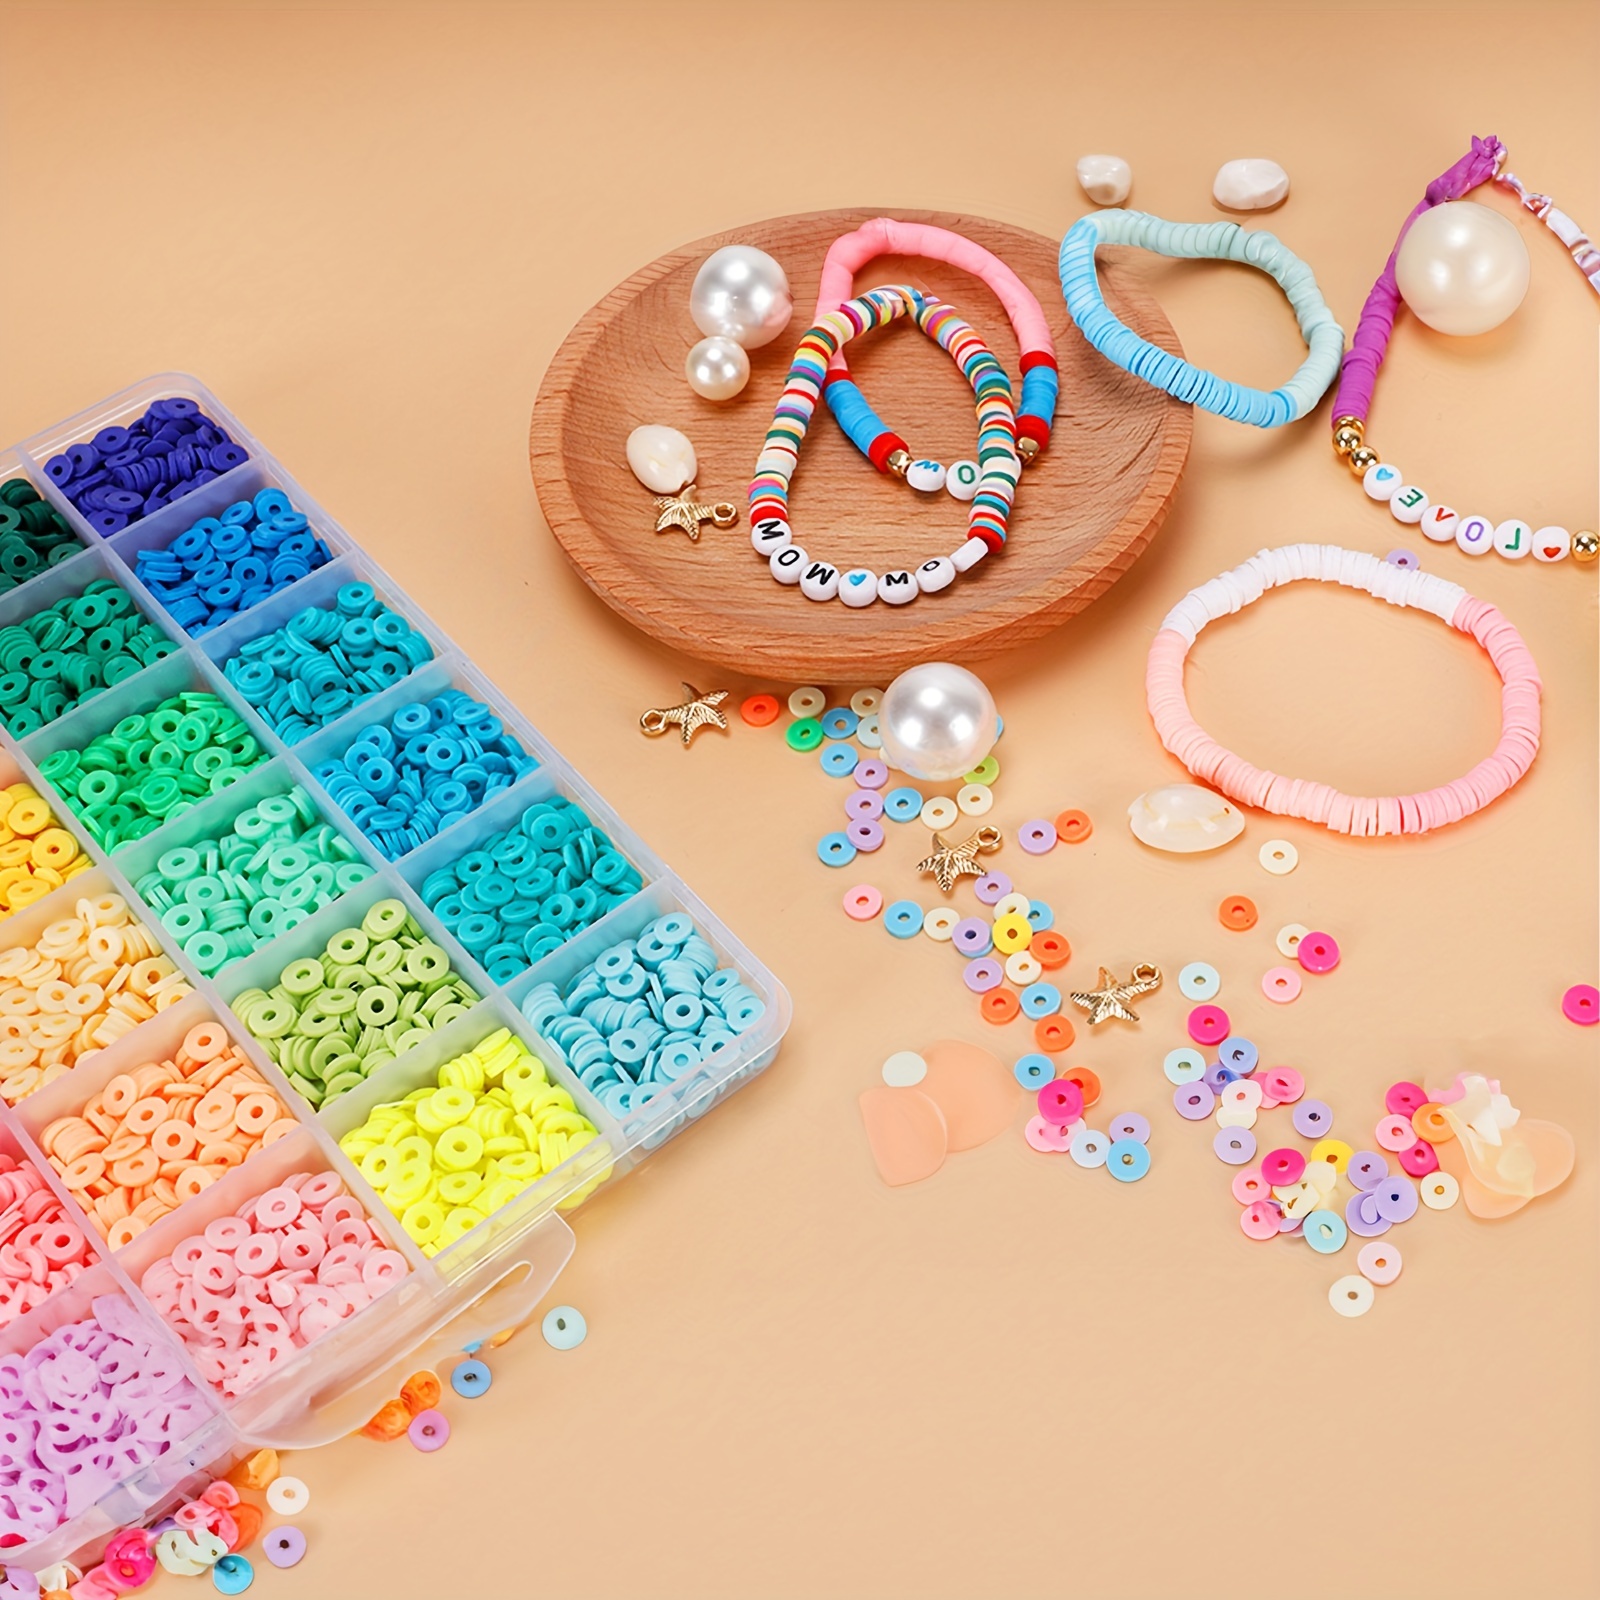 5000pcs Clay Heishi Beads For Bracelet Jewelry Making Kit, Polymer Flat  Round Clay Beads Kit With 240pcs Letter Beads, Pendant Charms And Elastic *